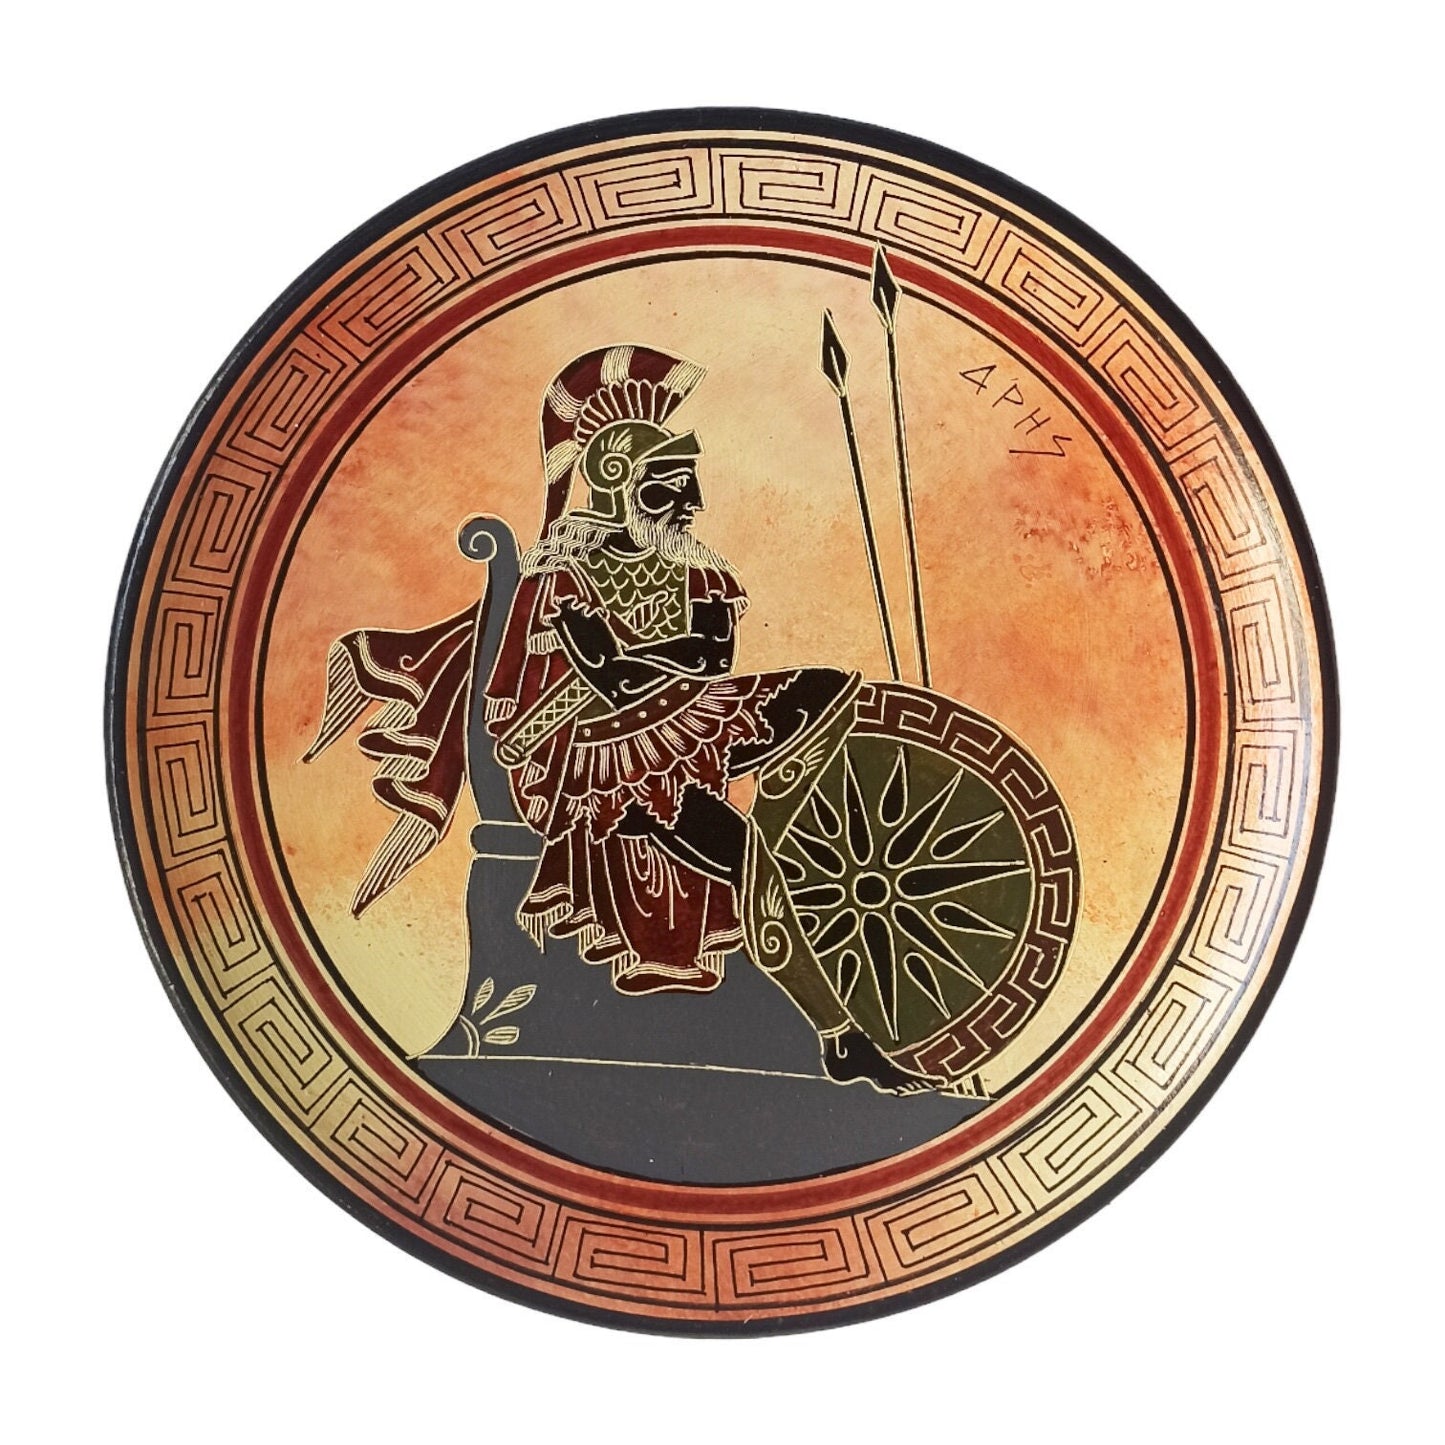 Ares Mars - Greek Roman God of Courage and War - The Spirit of Battle - One of the Twelve Olympians - Ceramic plate - Handmade in Greece